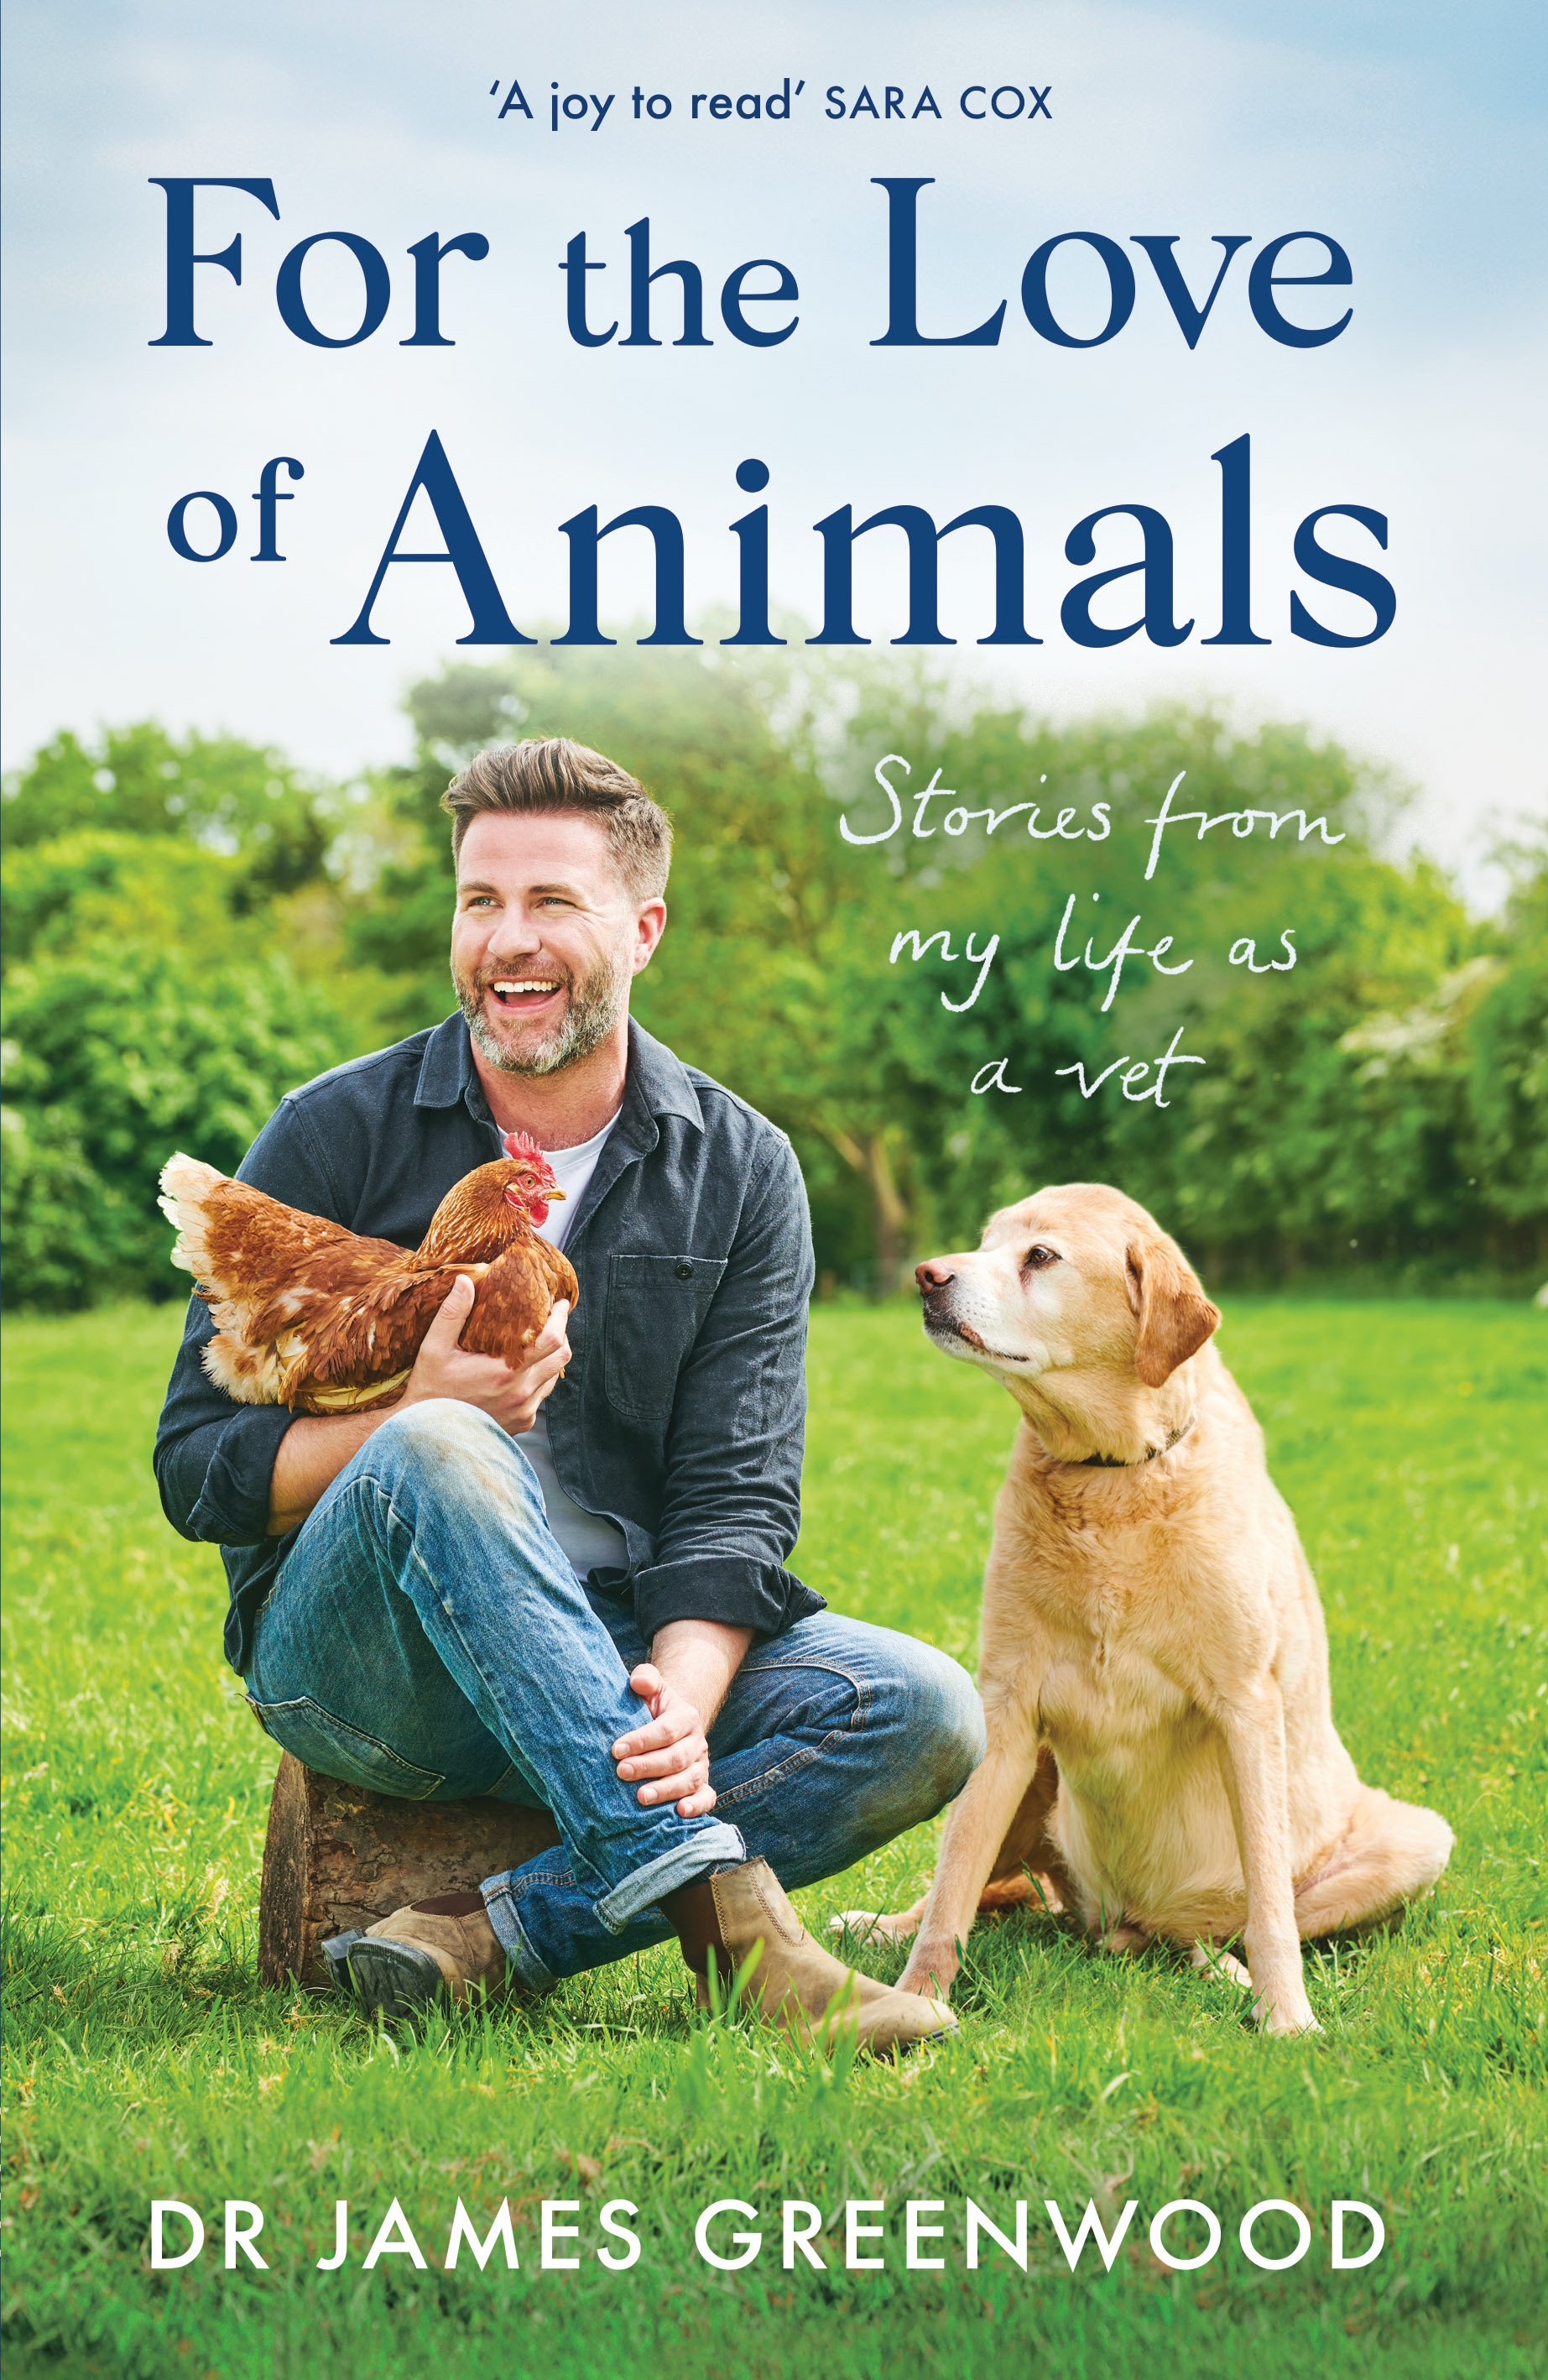 Book jacket of For The Love Of Animals by Dr James Greenwood (Seven Dials/PA)